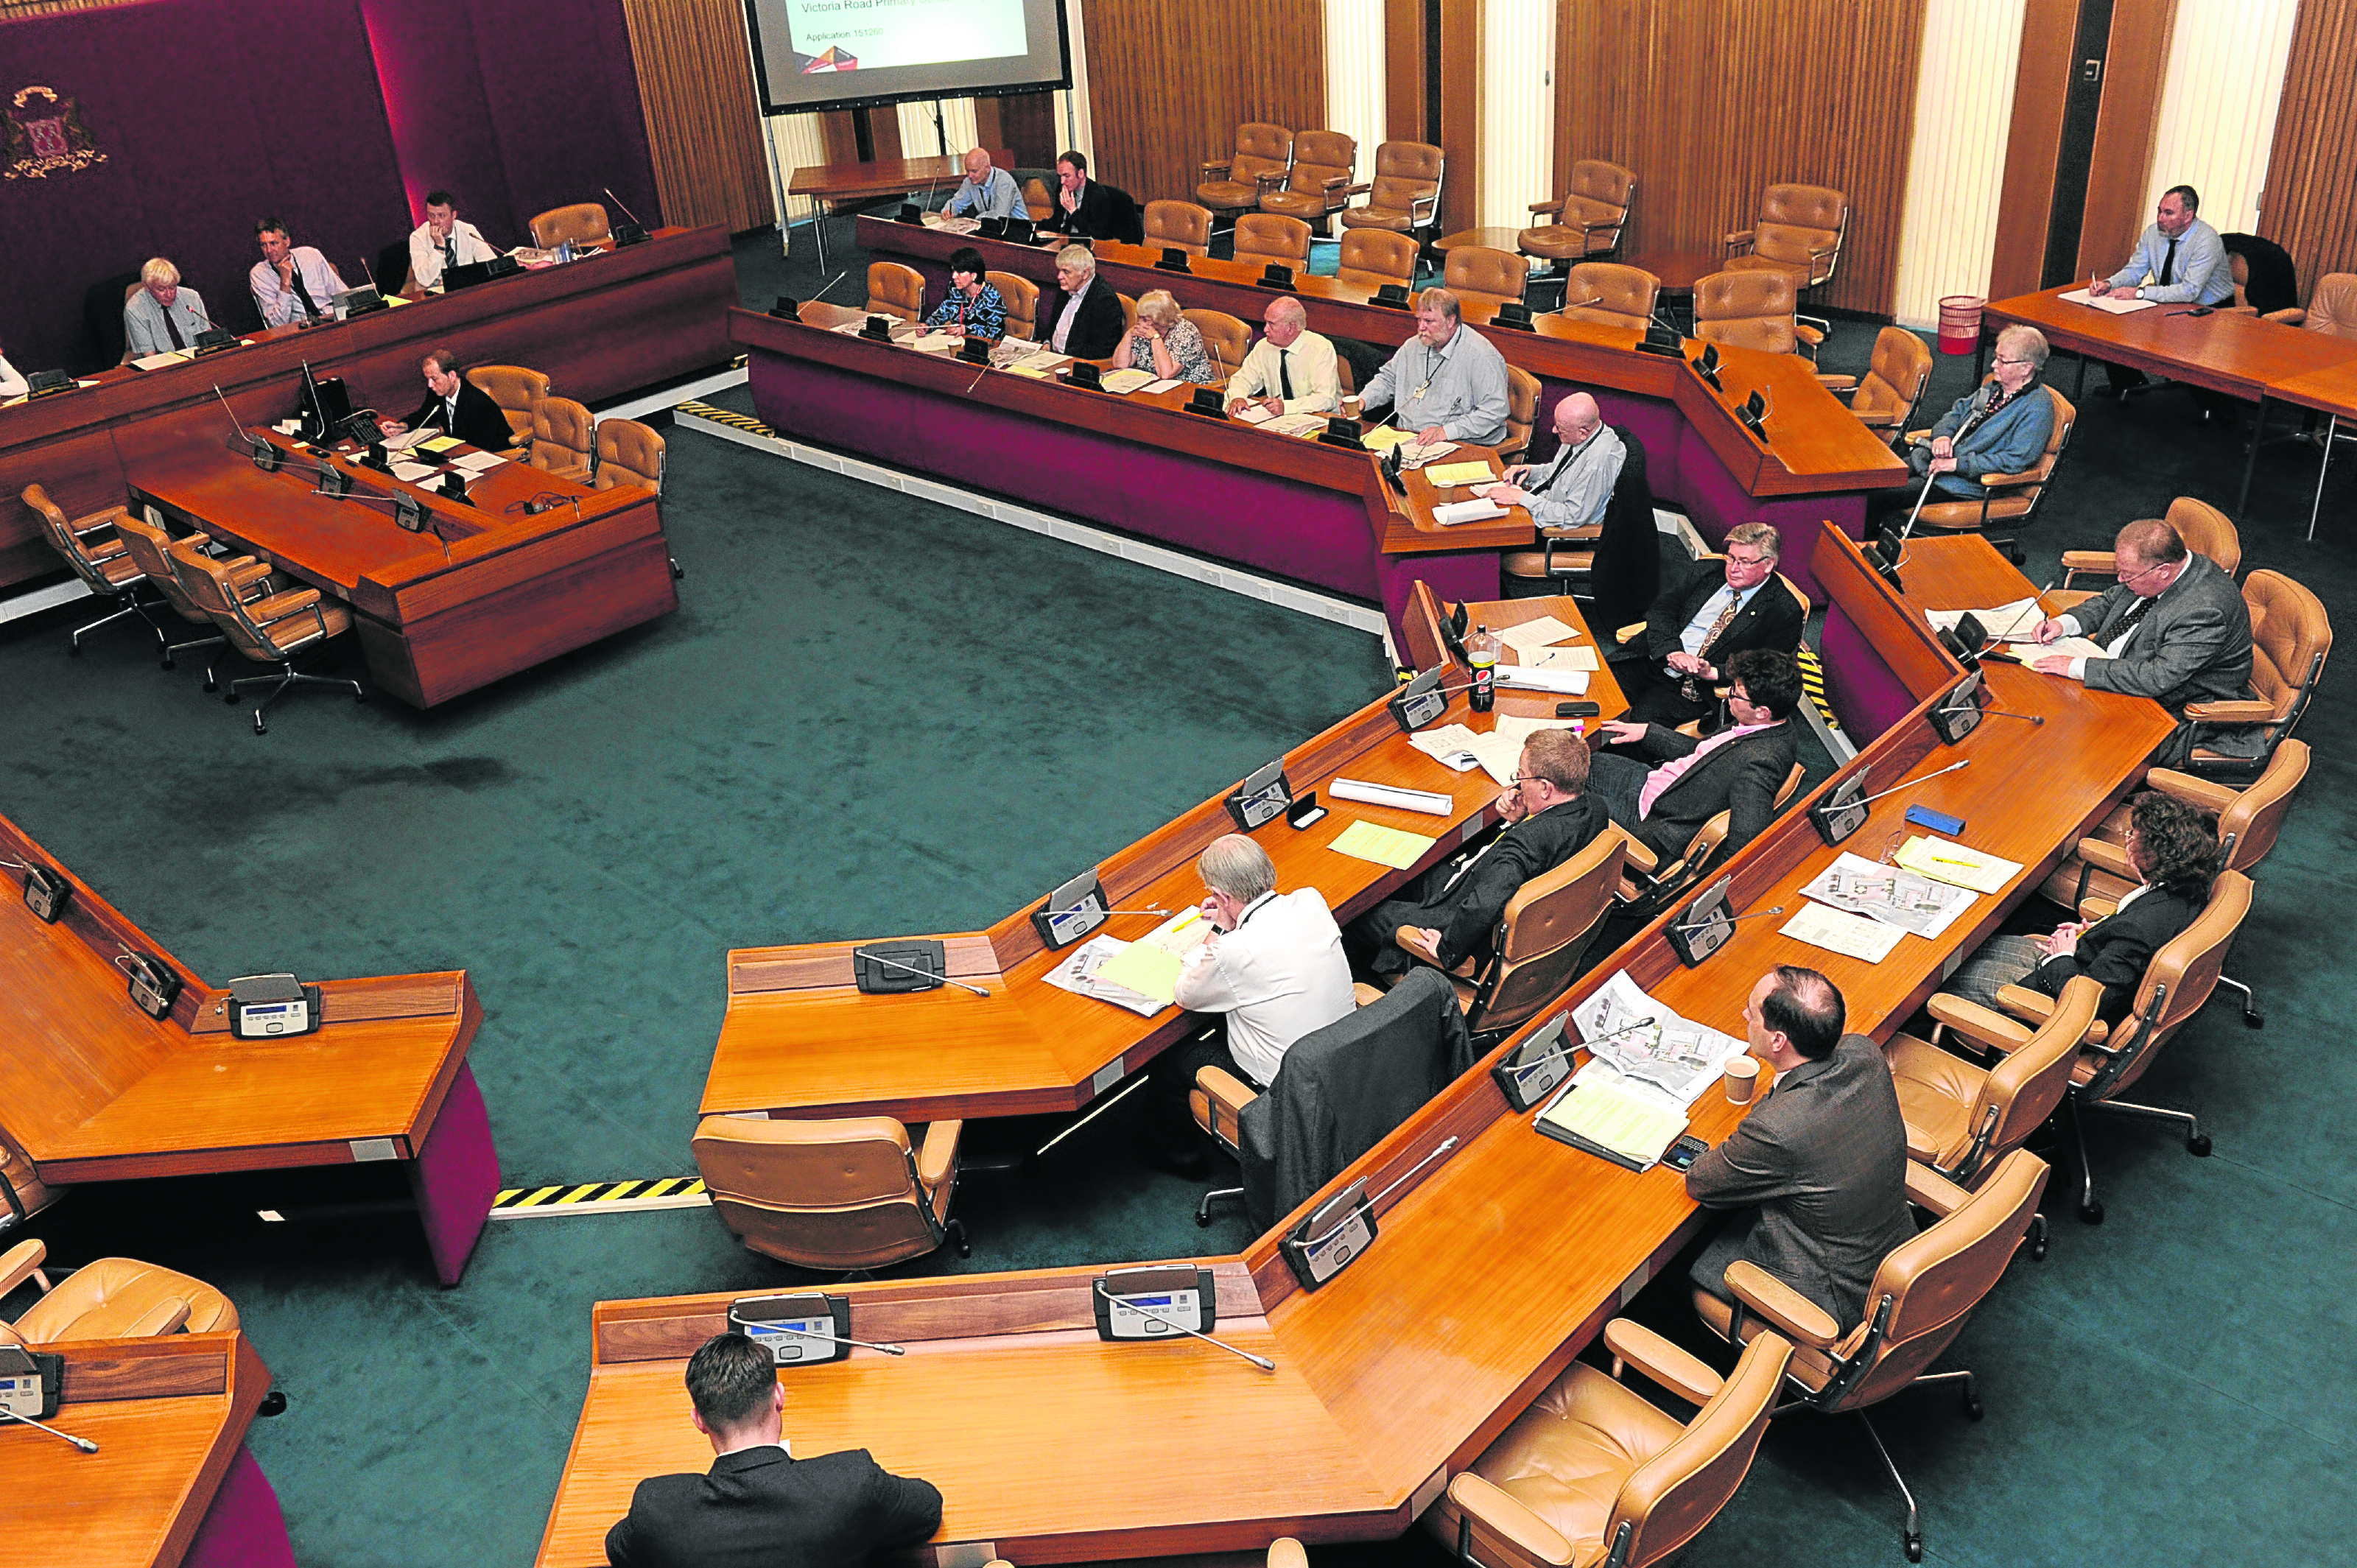 Council Chamber in Broad Street